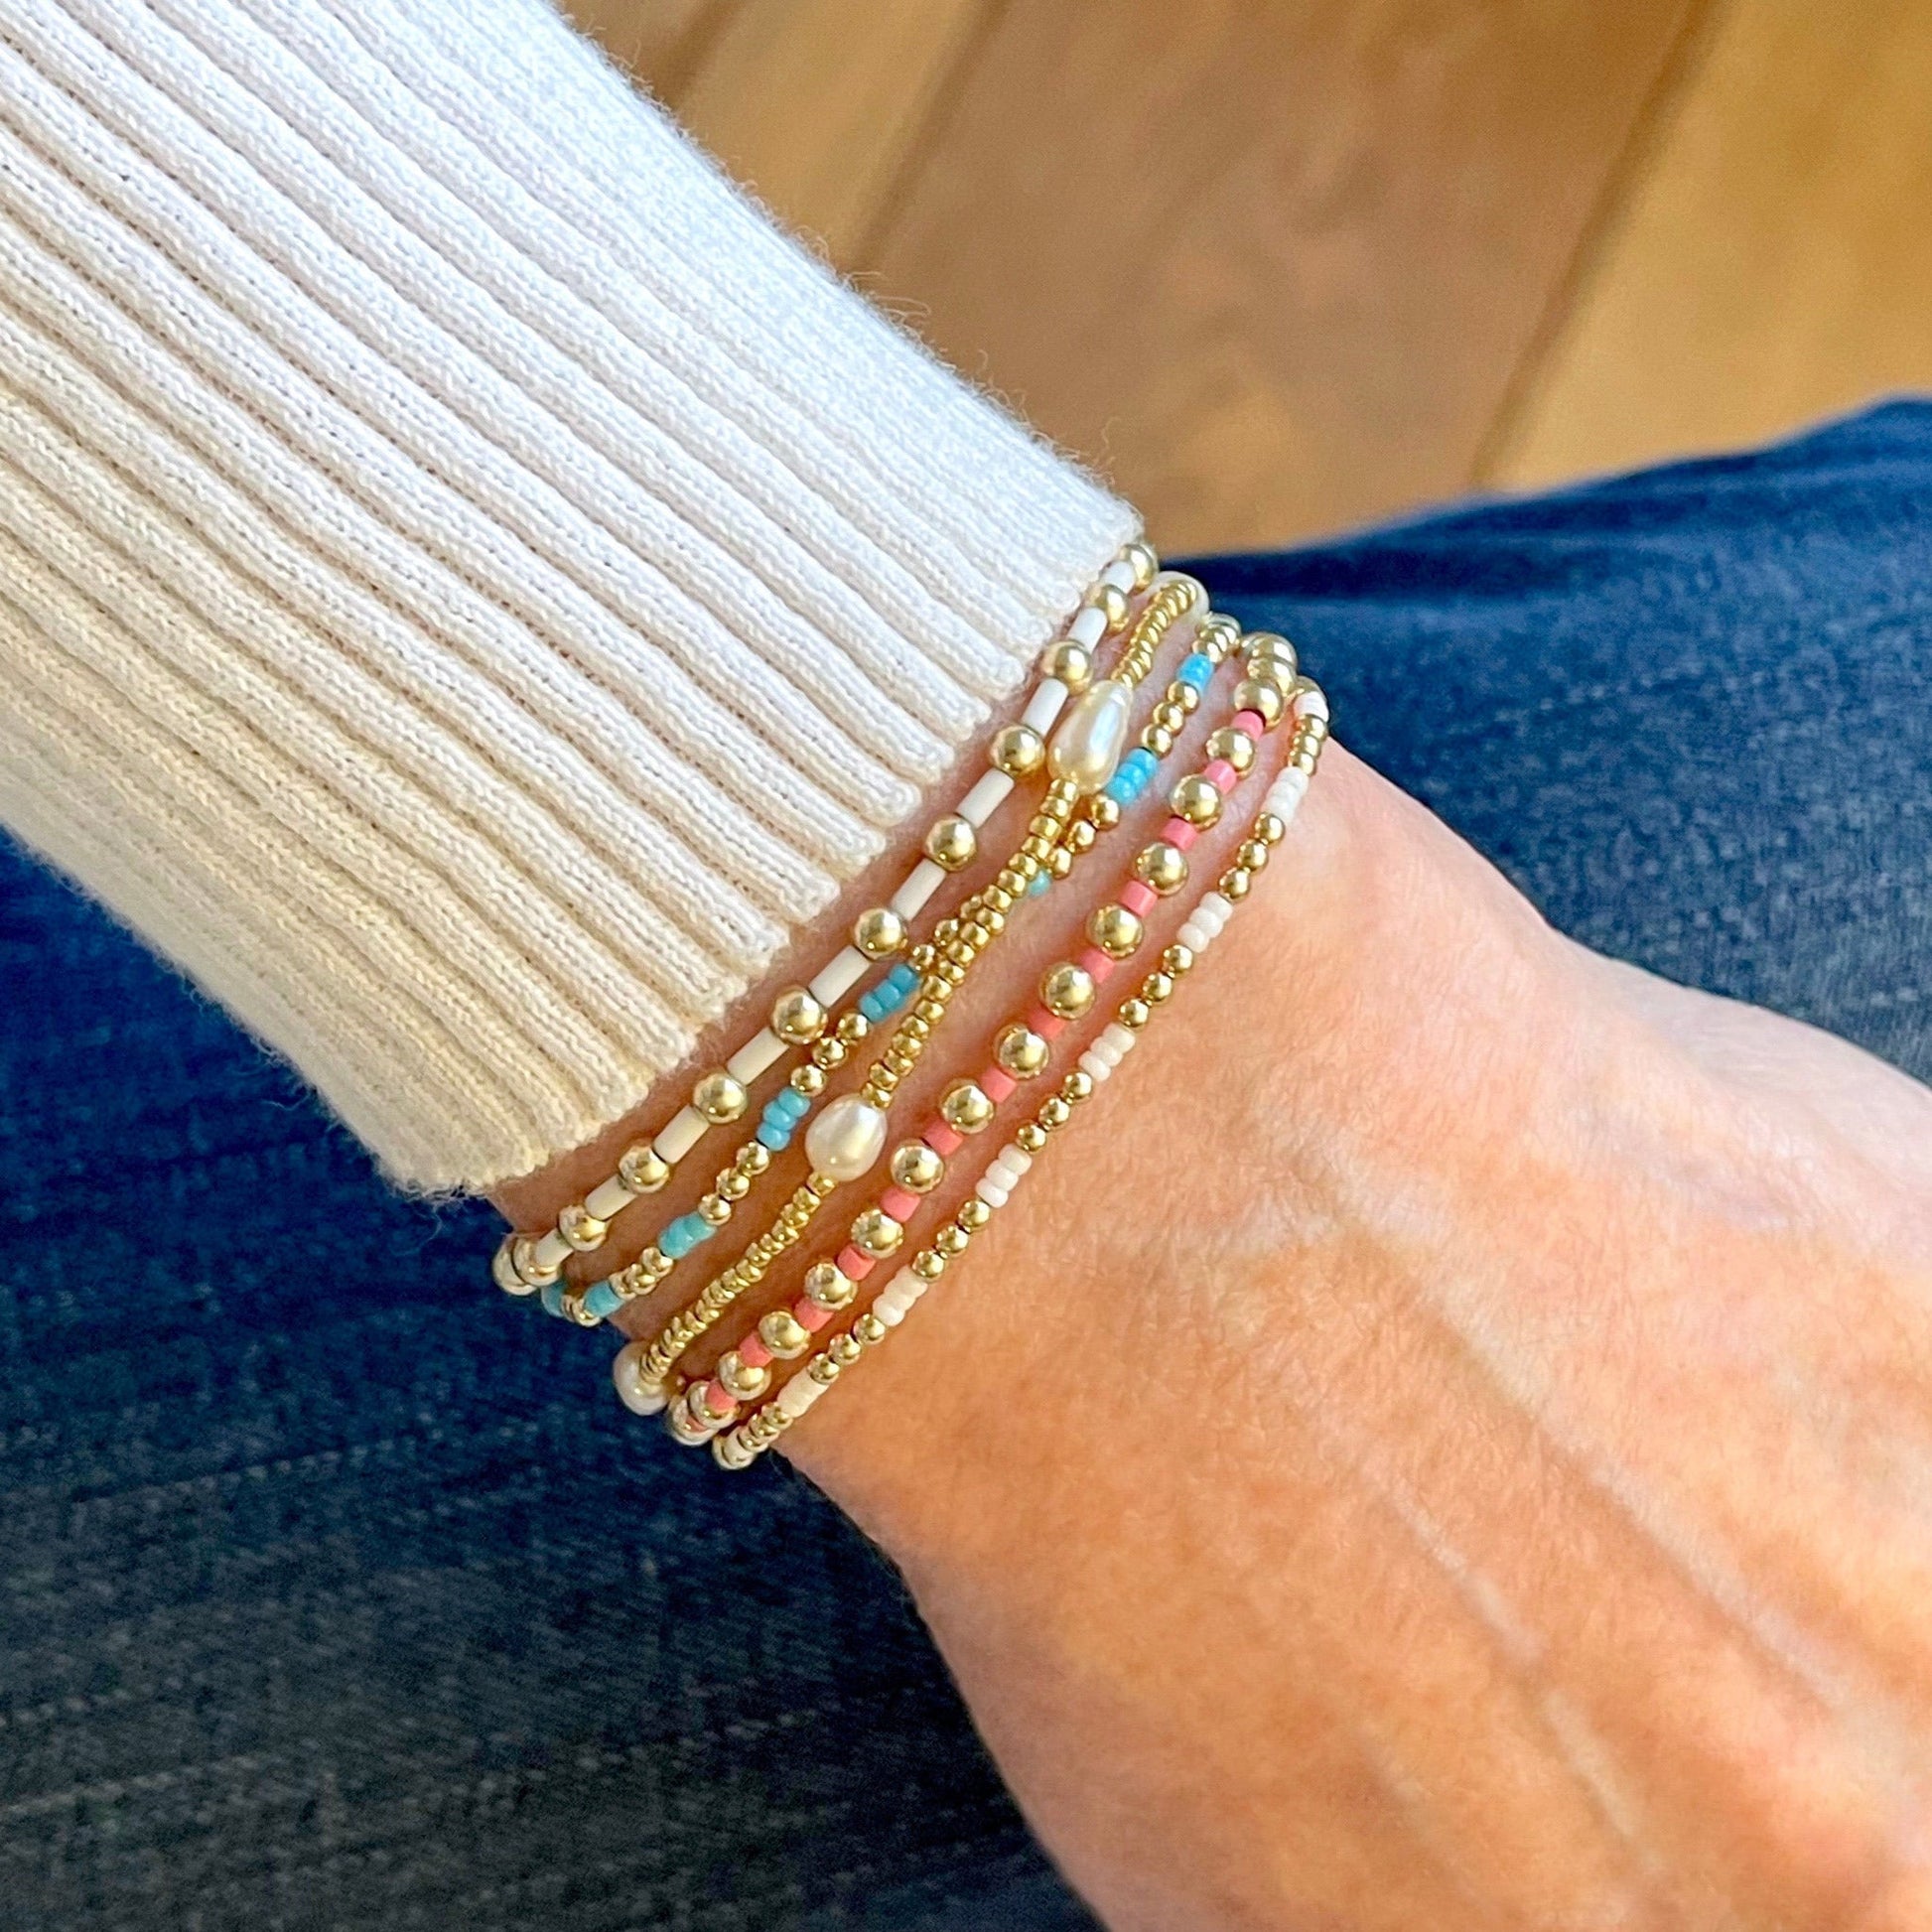 Stacked beaded bracelets with 14k gold fill balls, freshwater pearls, and pink, blue, and white seed beads. Stretch bracelets. Waterproof.